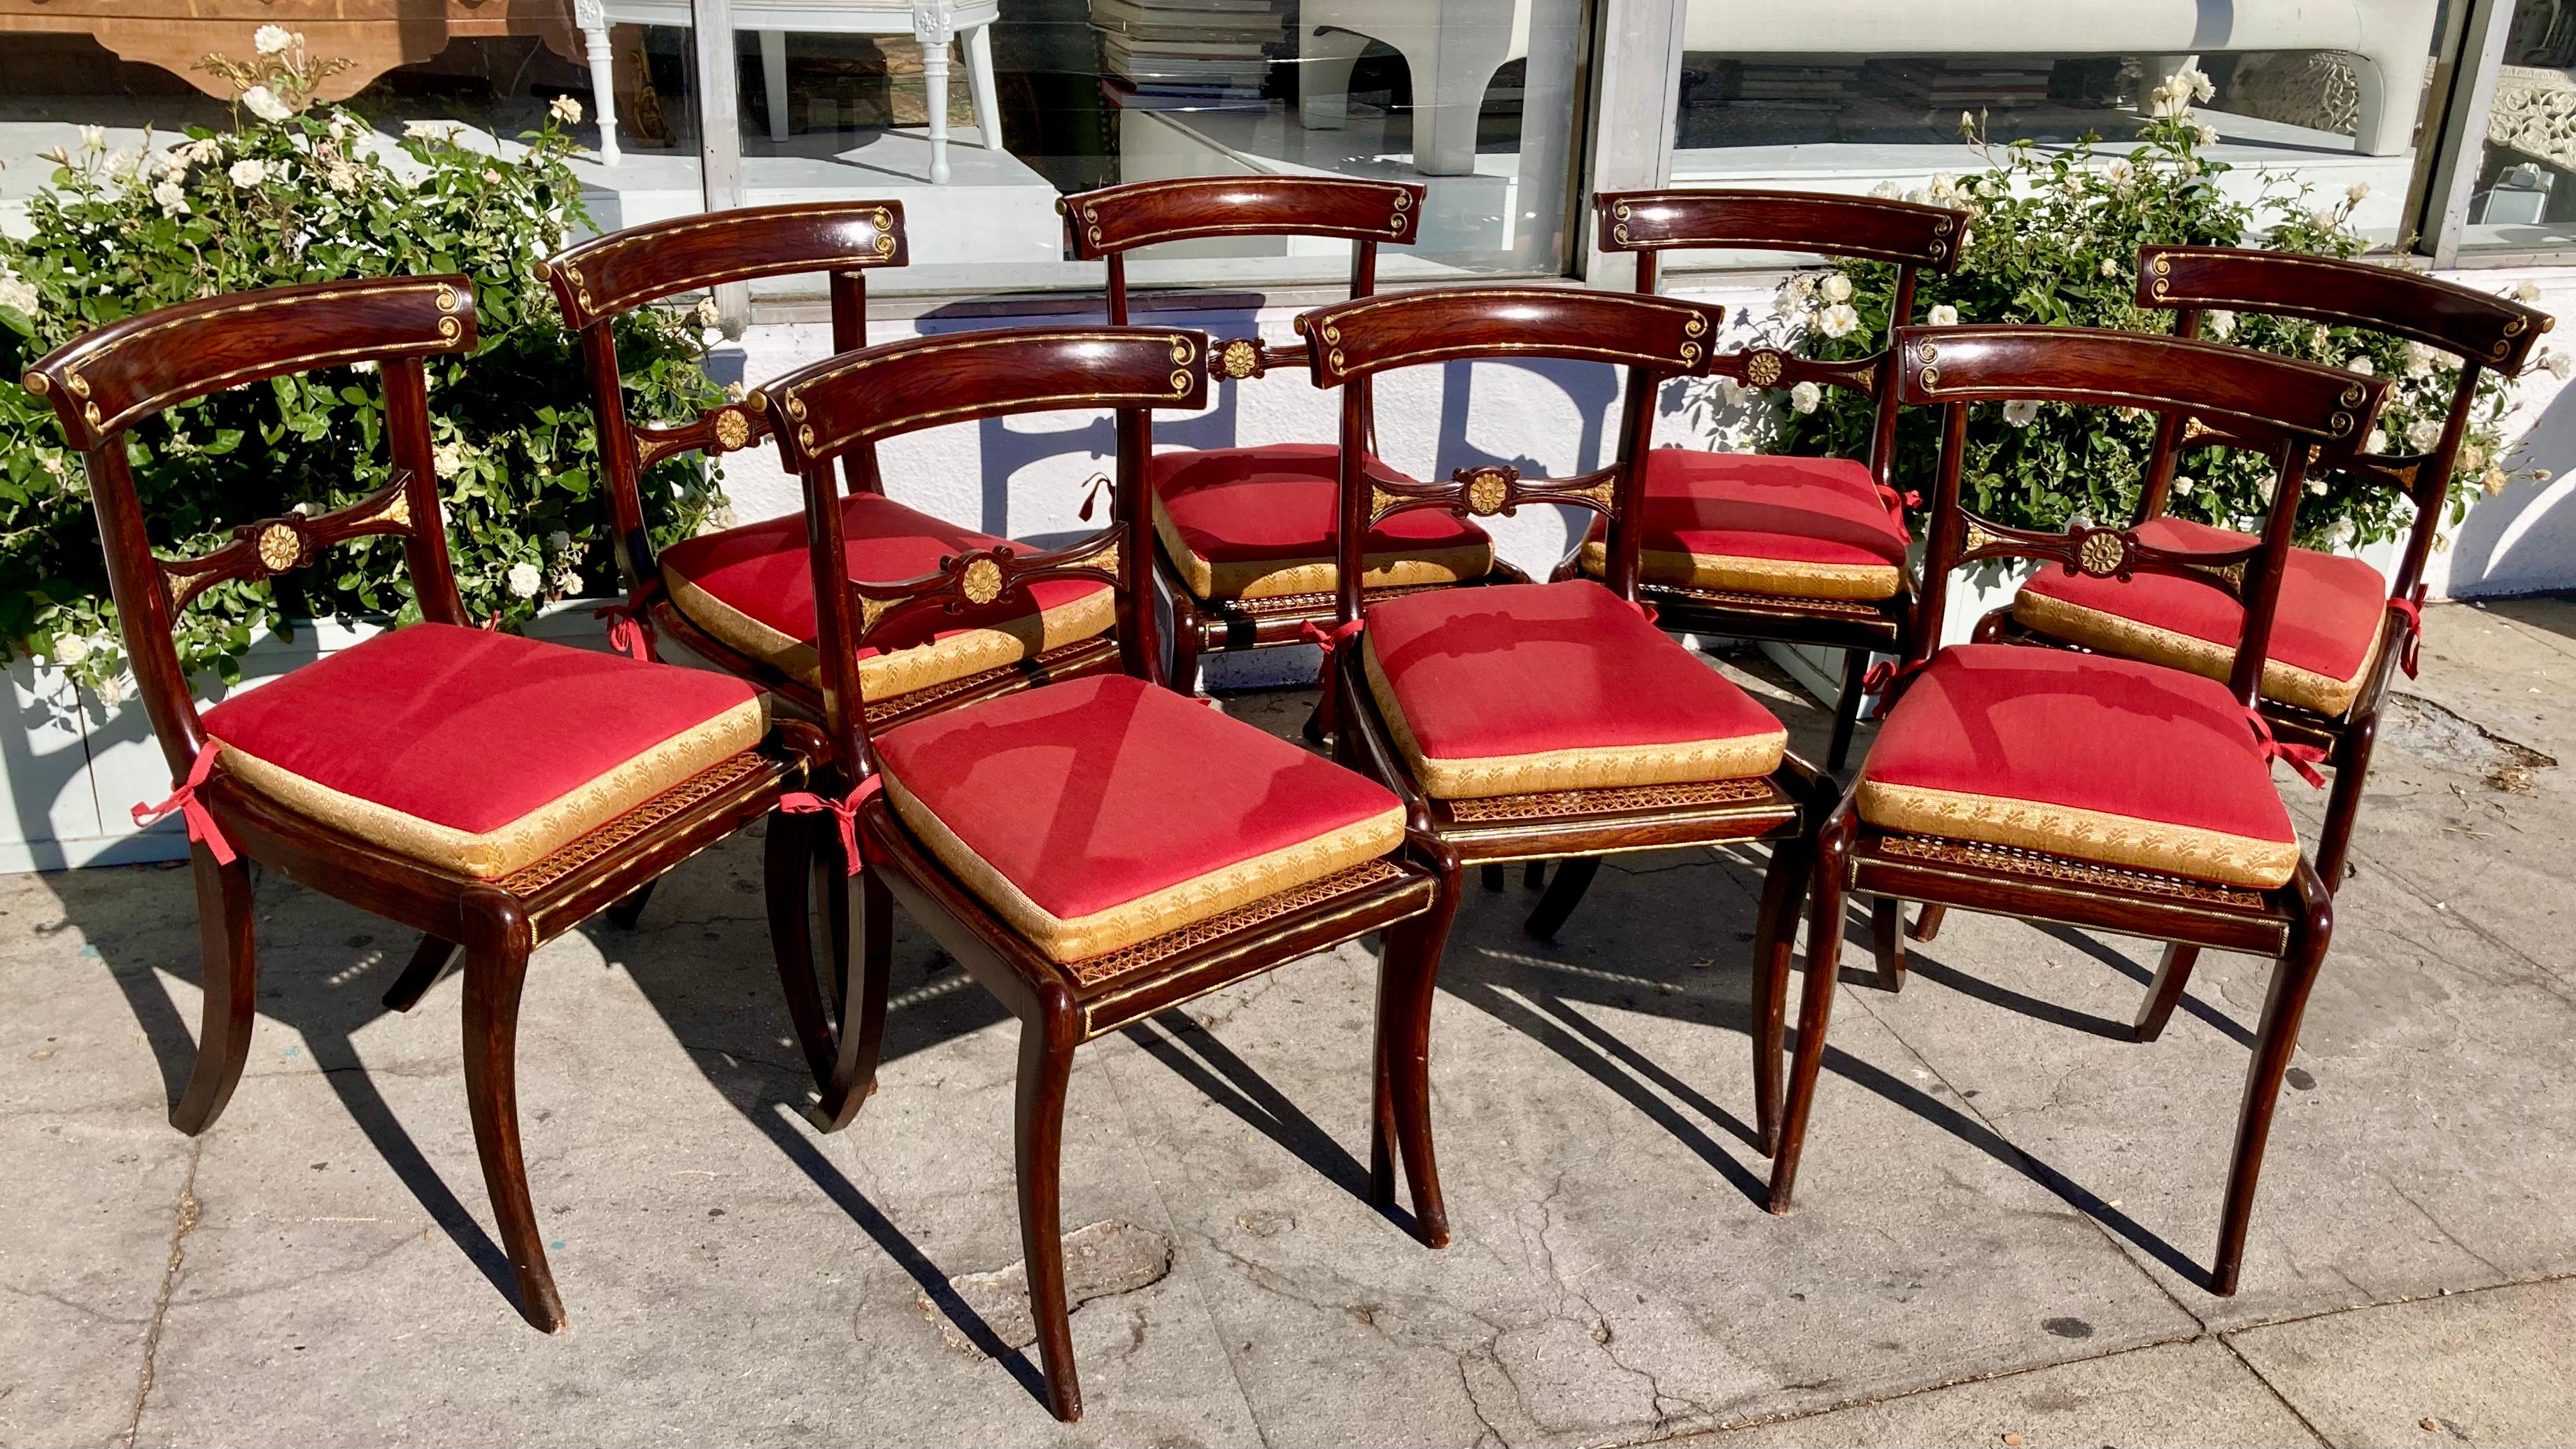 Beautiful set of 8, 19th Century ormolu inset Regency dining chairs with red cushions and gold metal banding. Beautiful cane work under the cushions. These chair are the original finish and are 19th Century from England. Gorgeous ormolu inset